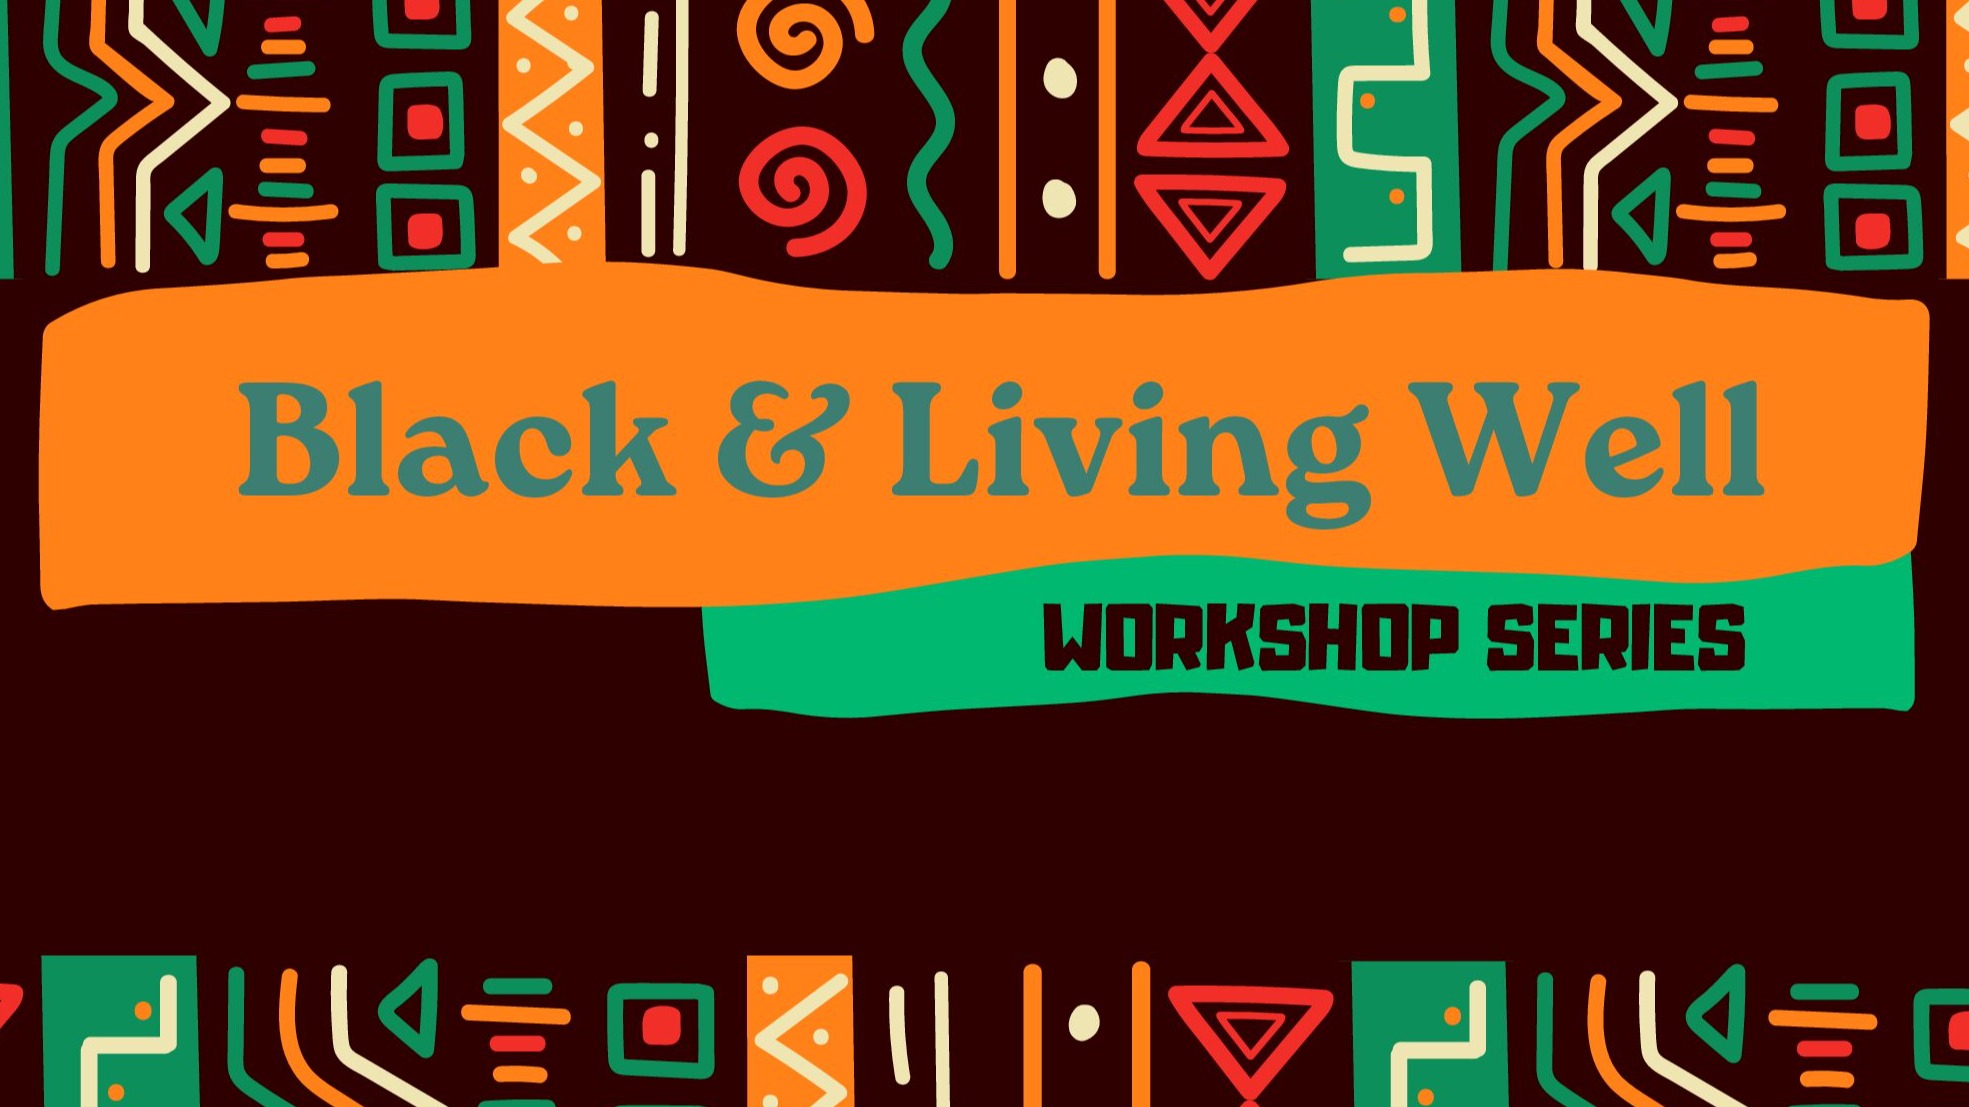 Black and Living Well Workshop Series Promo